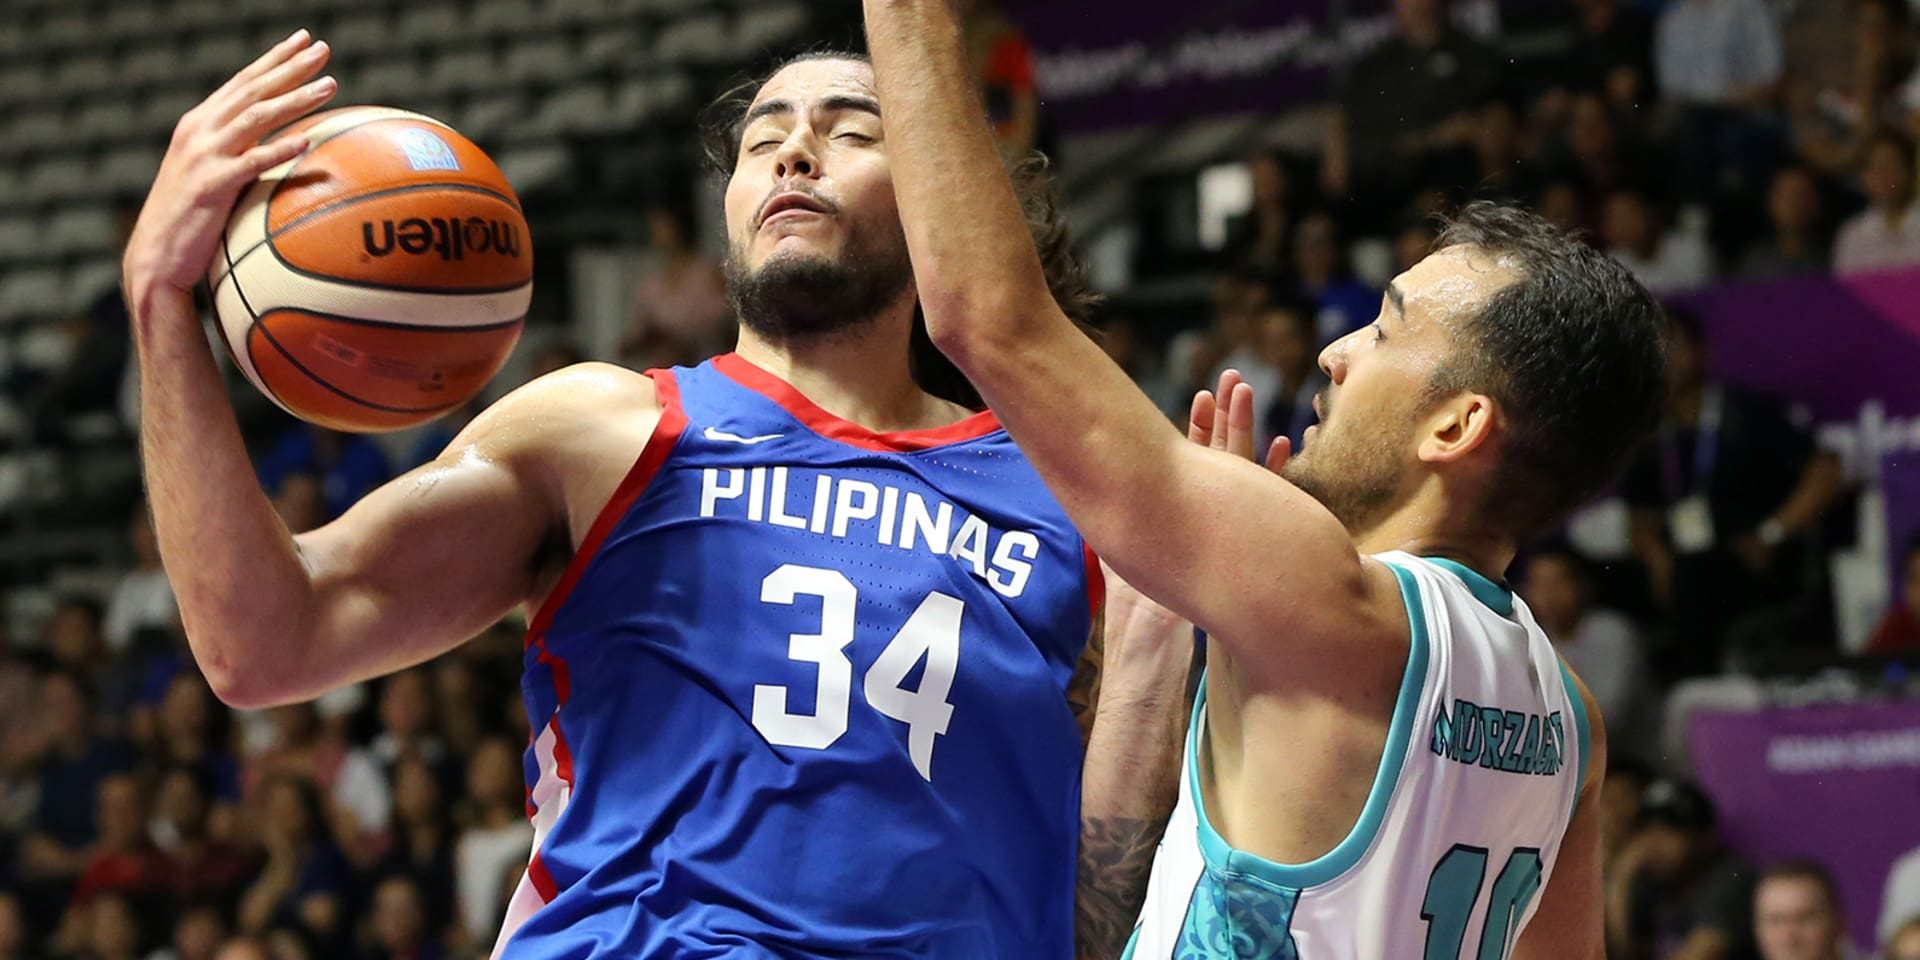 IN NUMBERS: The Philippines in the Asian Games